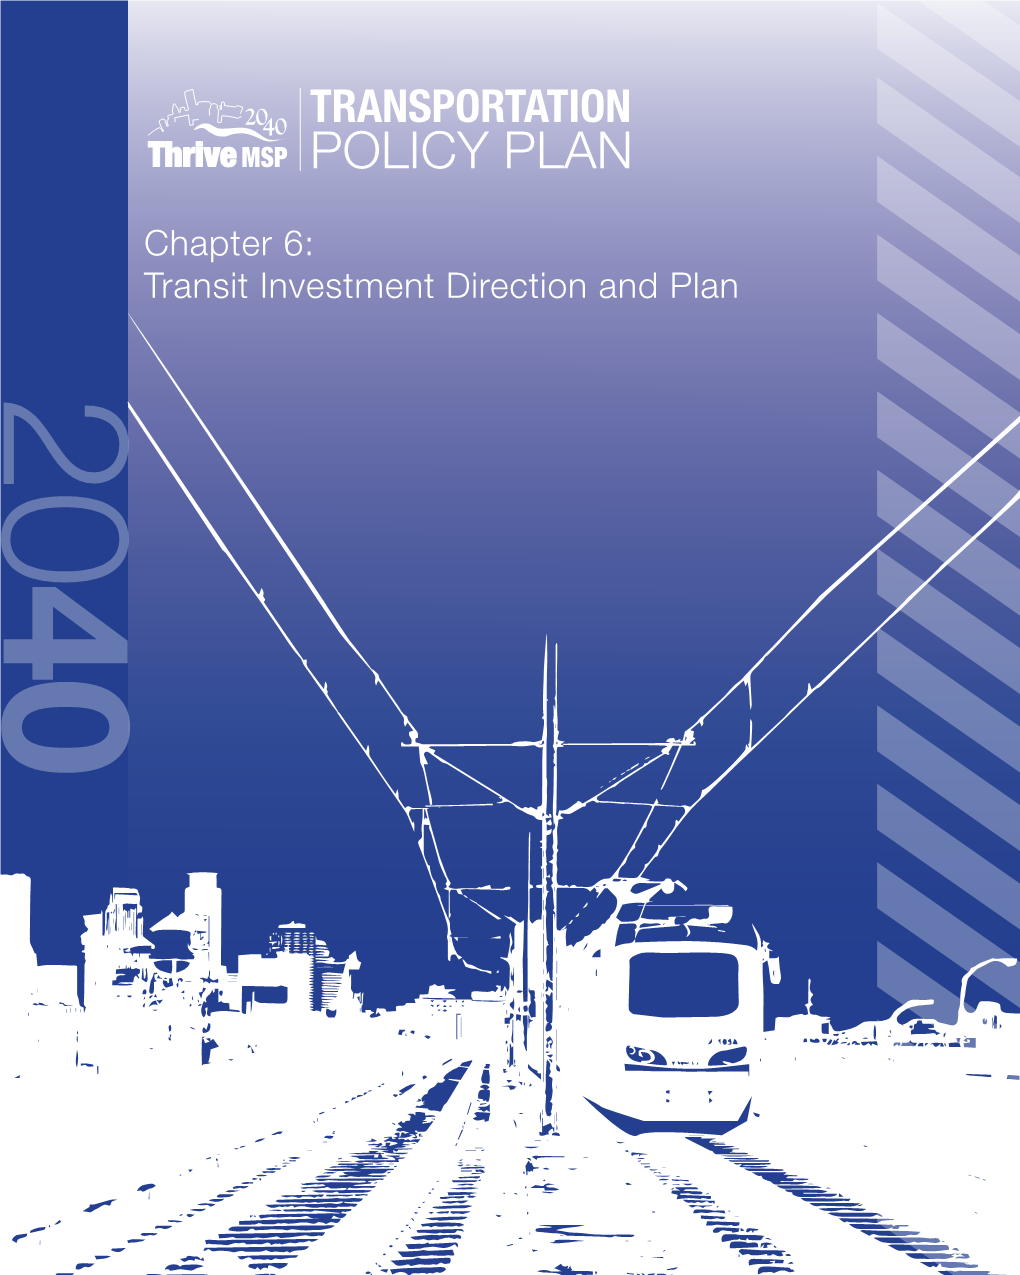 Transit Investment Direction and Plan 20 40